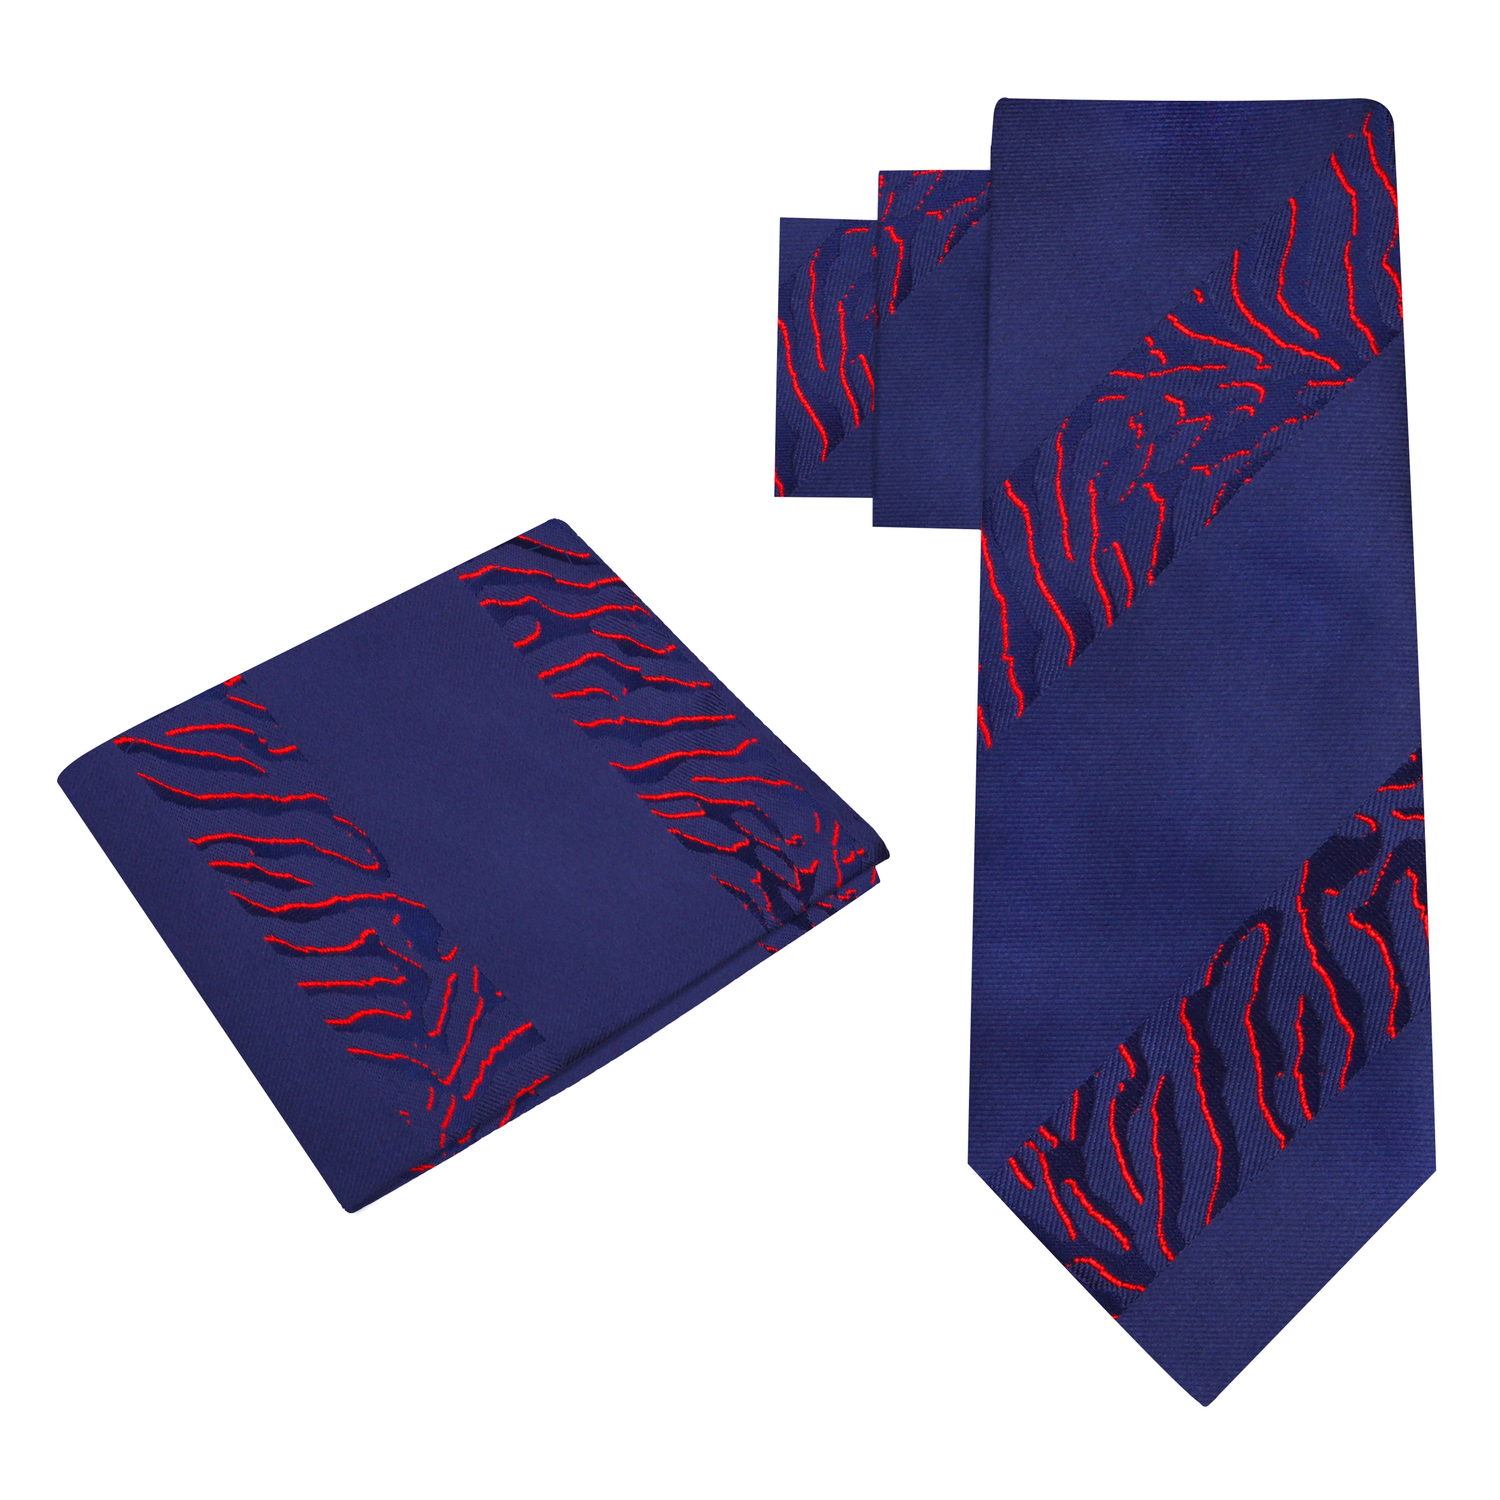 View 2: Blue Red Tiger Strength Tie and Square